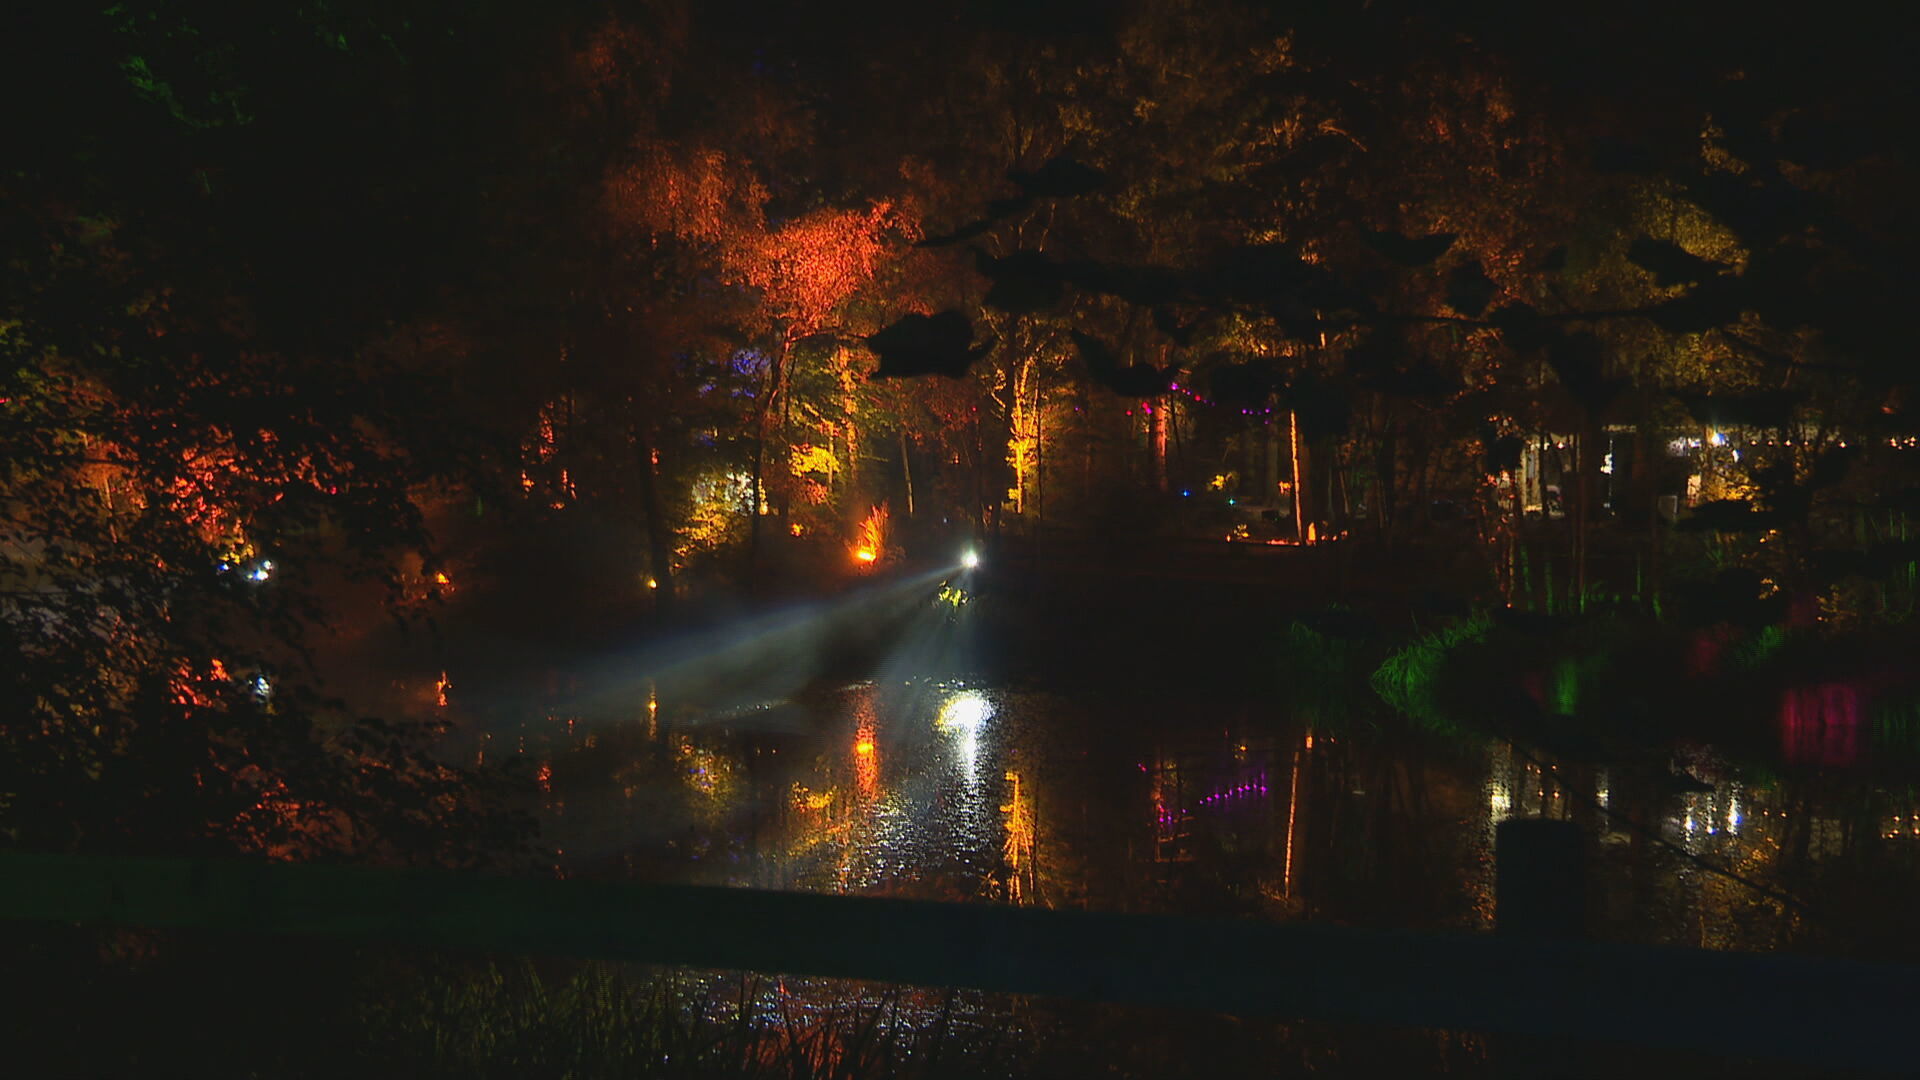 The Enchanted Forest light show helped drum up cash for vital community projects